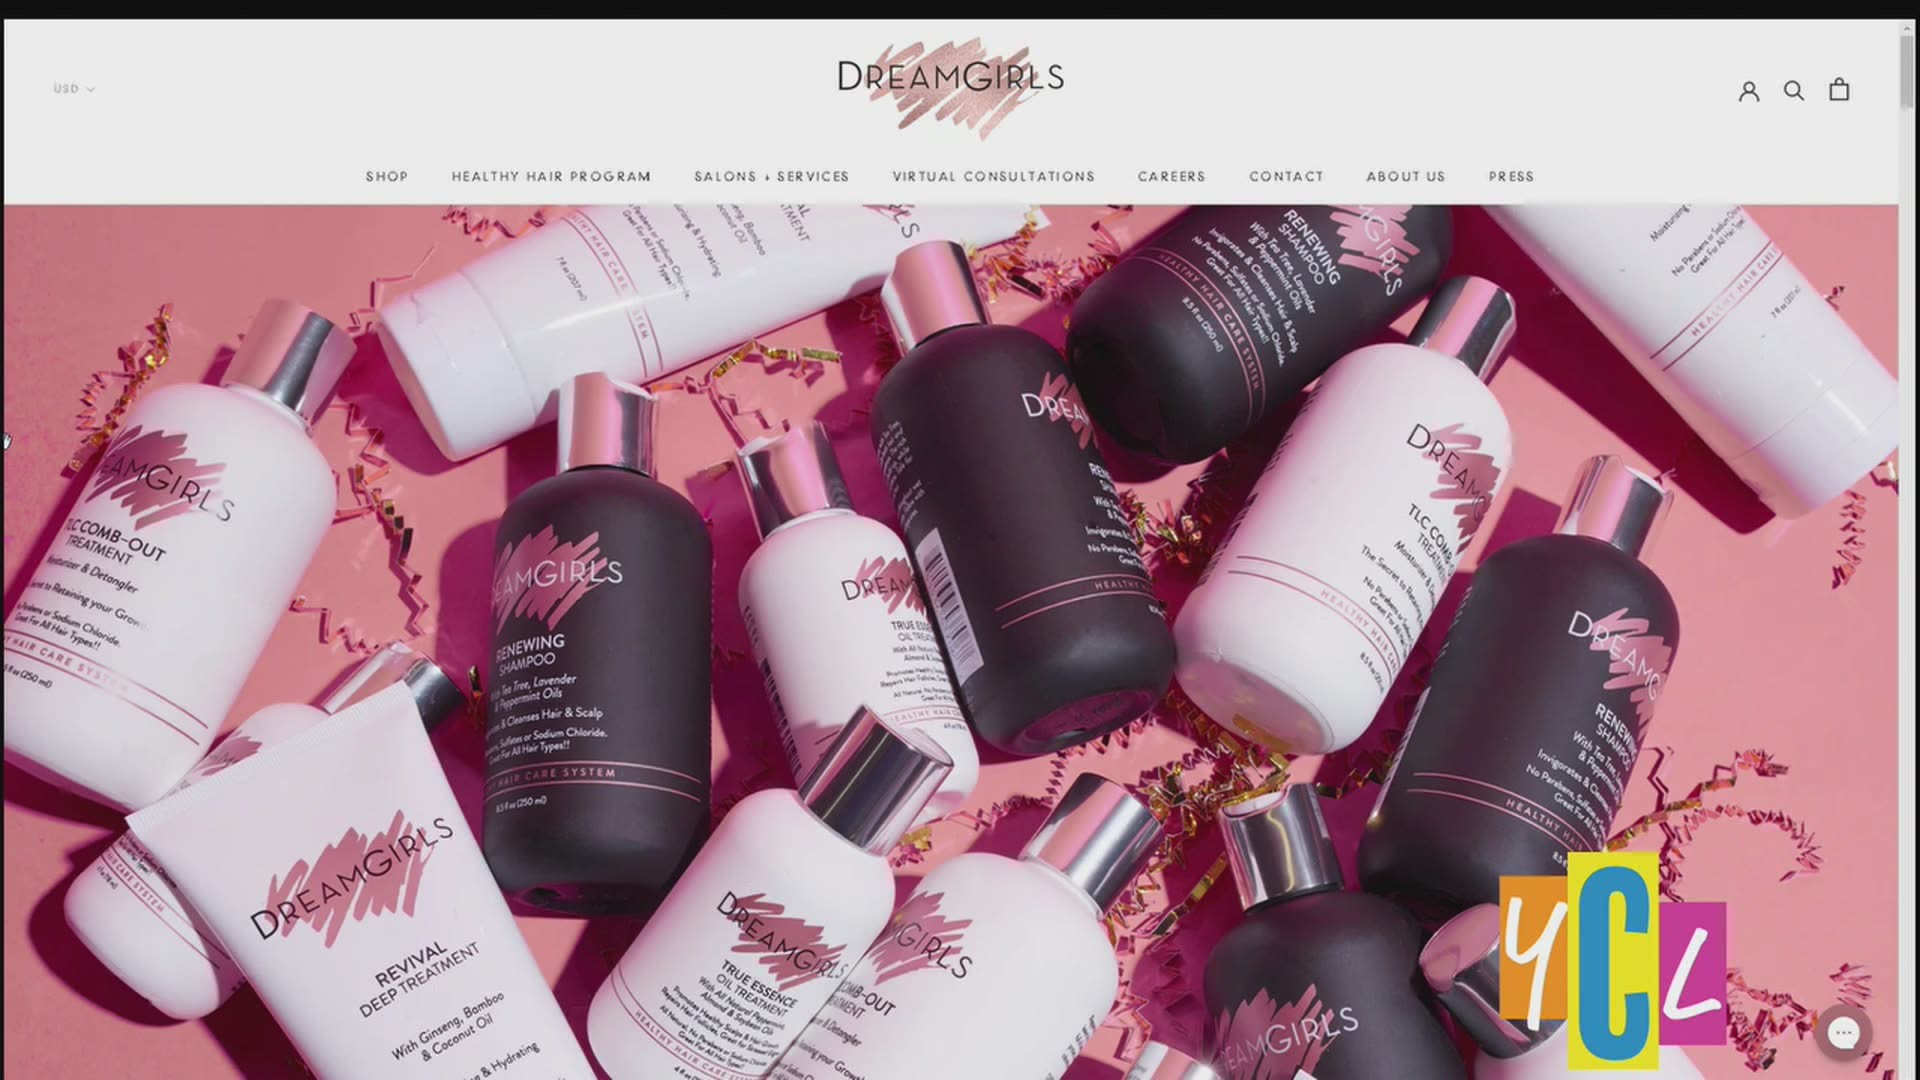 Black-owned, female founded and family operated business "DreamGirls" shares how they surpassed $1M in sales, 6 months after launching their hair care product line.